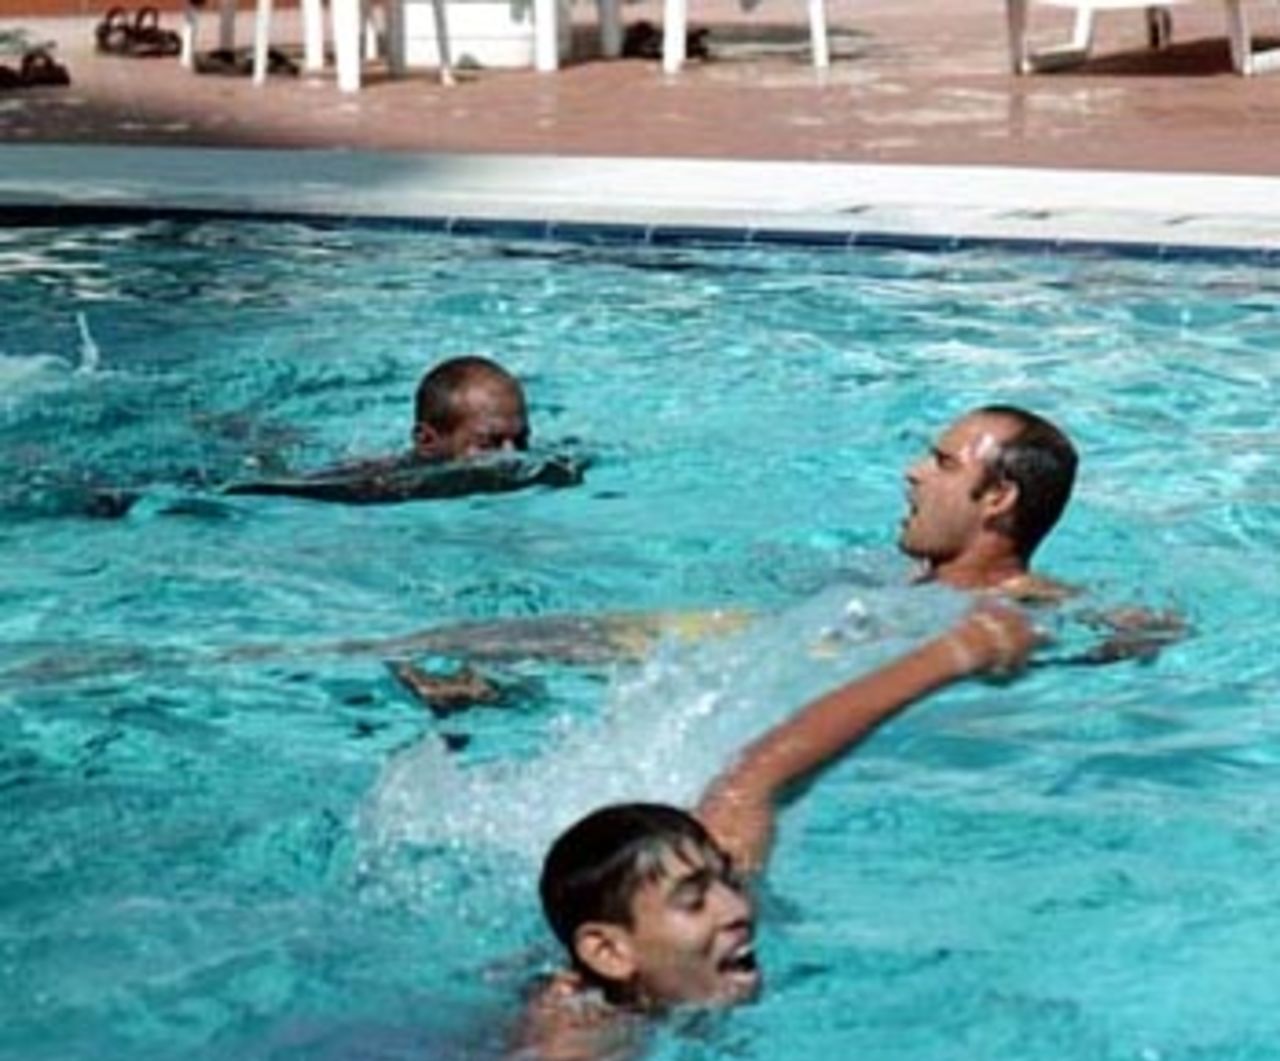 The Sri Lankans enjoying themselves in the cool water. Coca-Cola Champions Trophy 2000/01, Sharjah, 22 October 2000